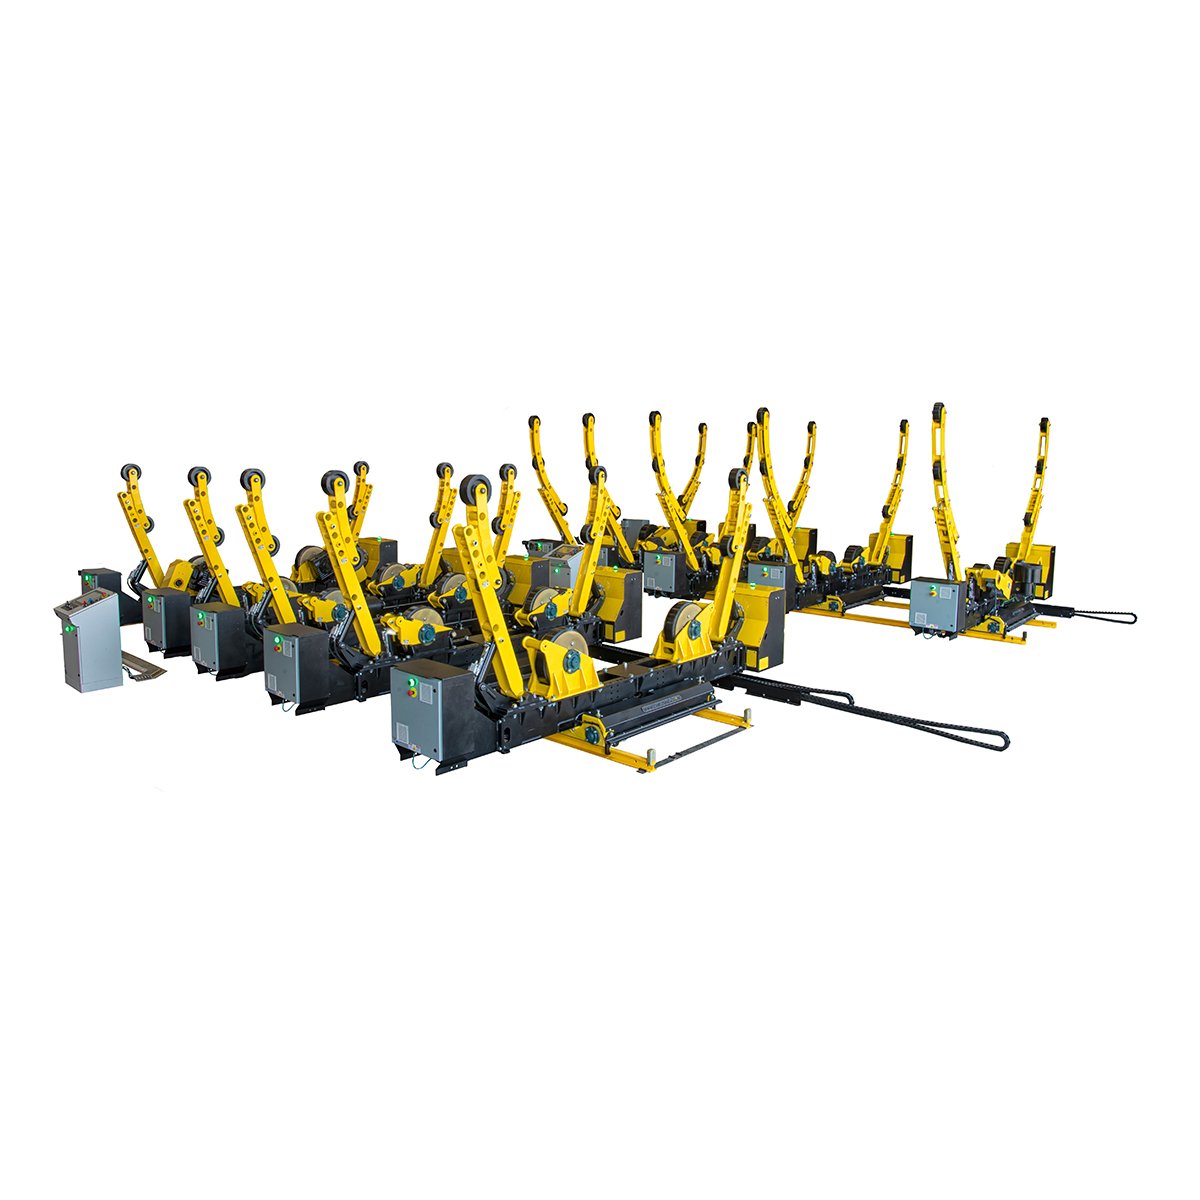 40 ton capacity growing line system